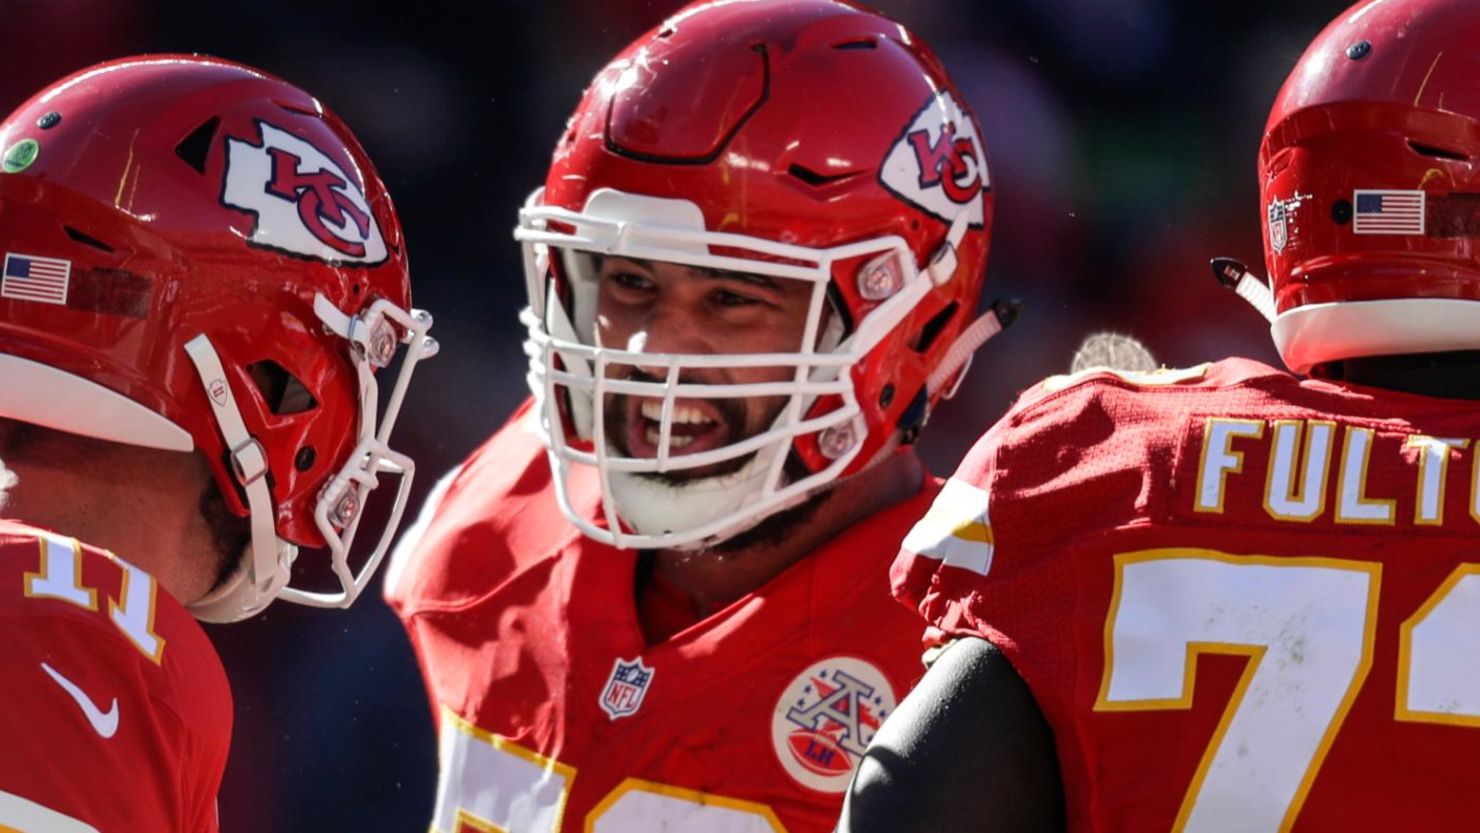 Kansas City's smiling right guard Laurent Duvernay-Tardif is a key part of the Chiefs' fast start, and the first medical doctor to play in the NFL.